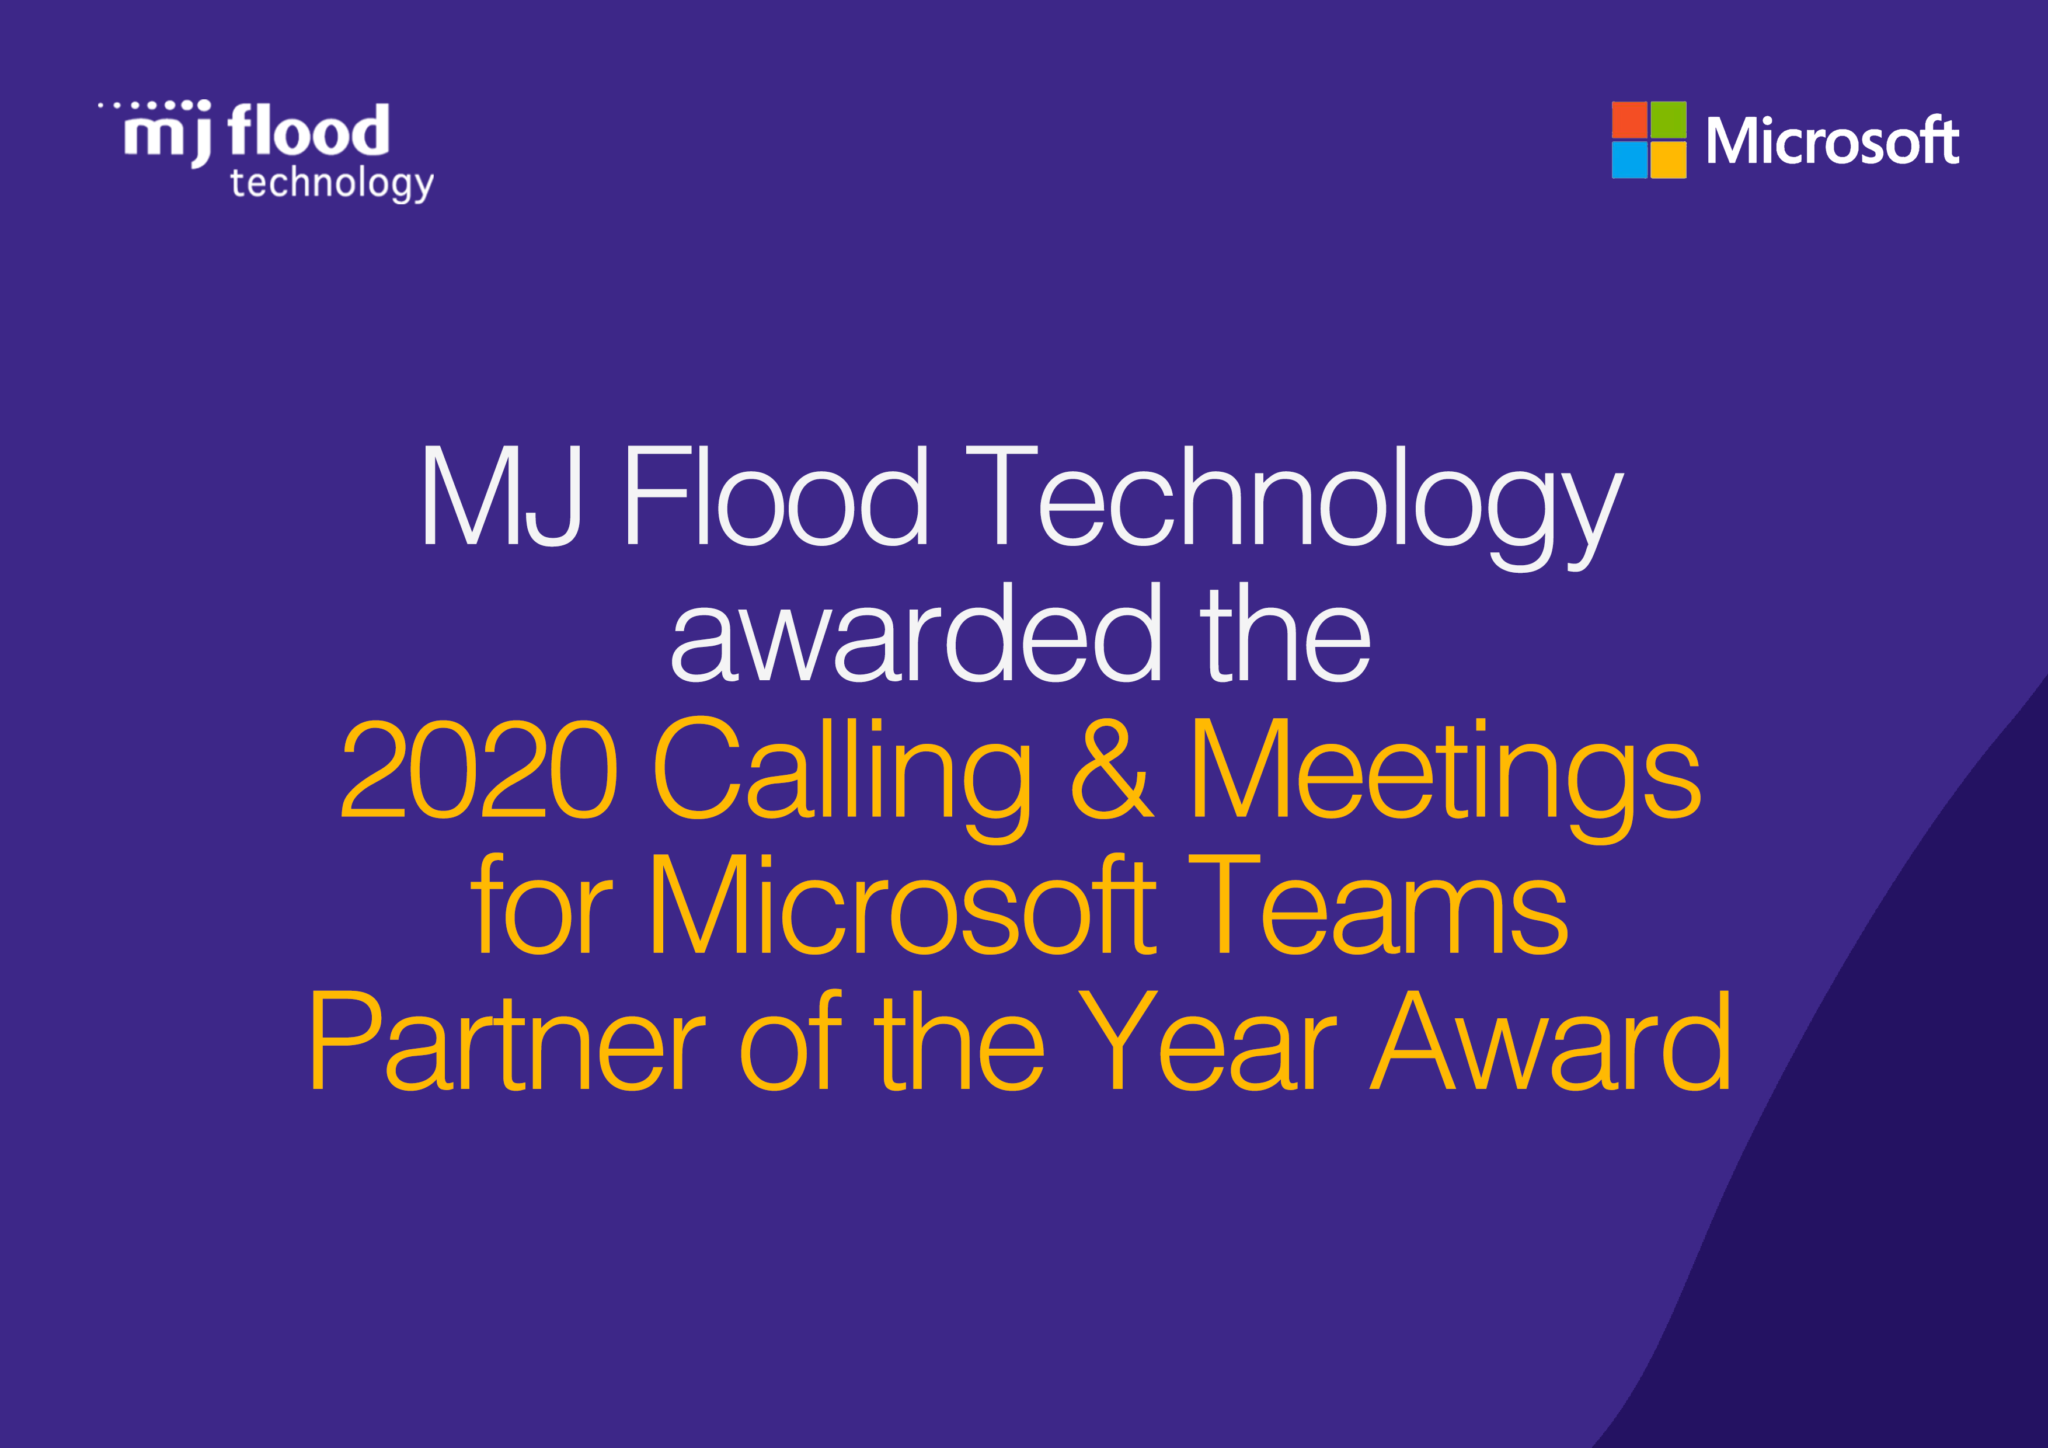 MJ Flood Technology wins 2020 Calling & Meetings for Microsoft Teams Partner of the Year Award